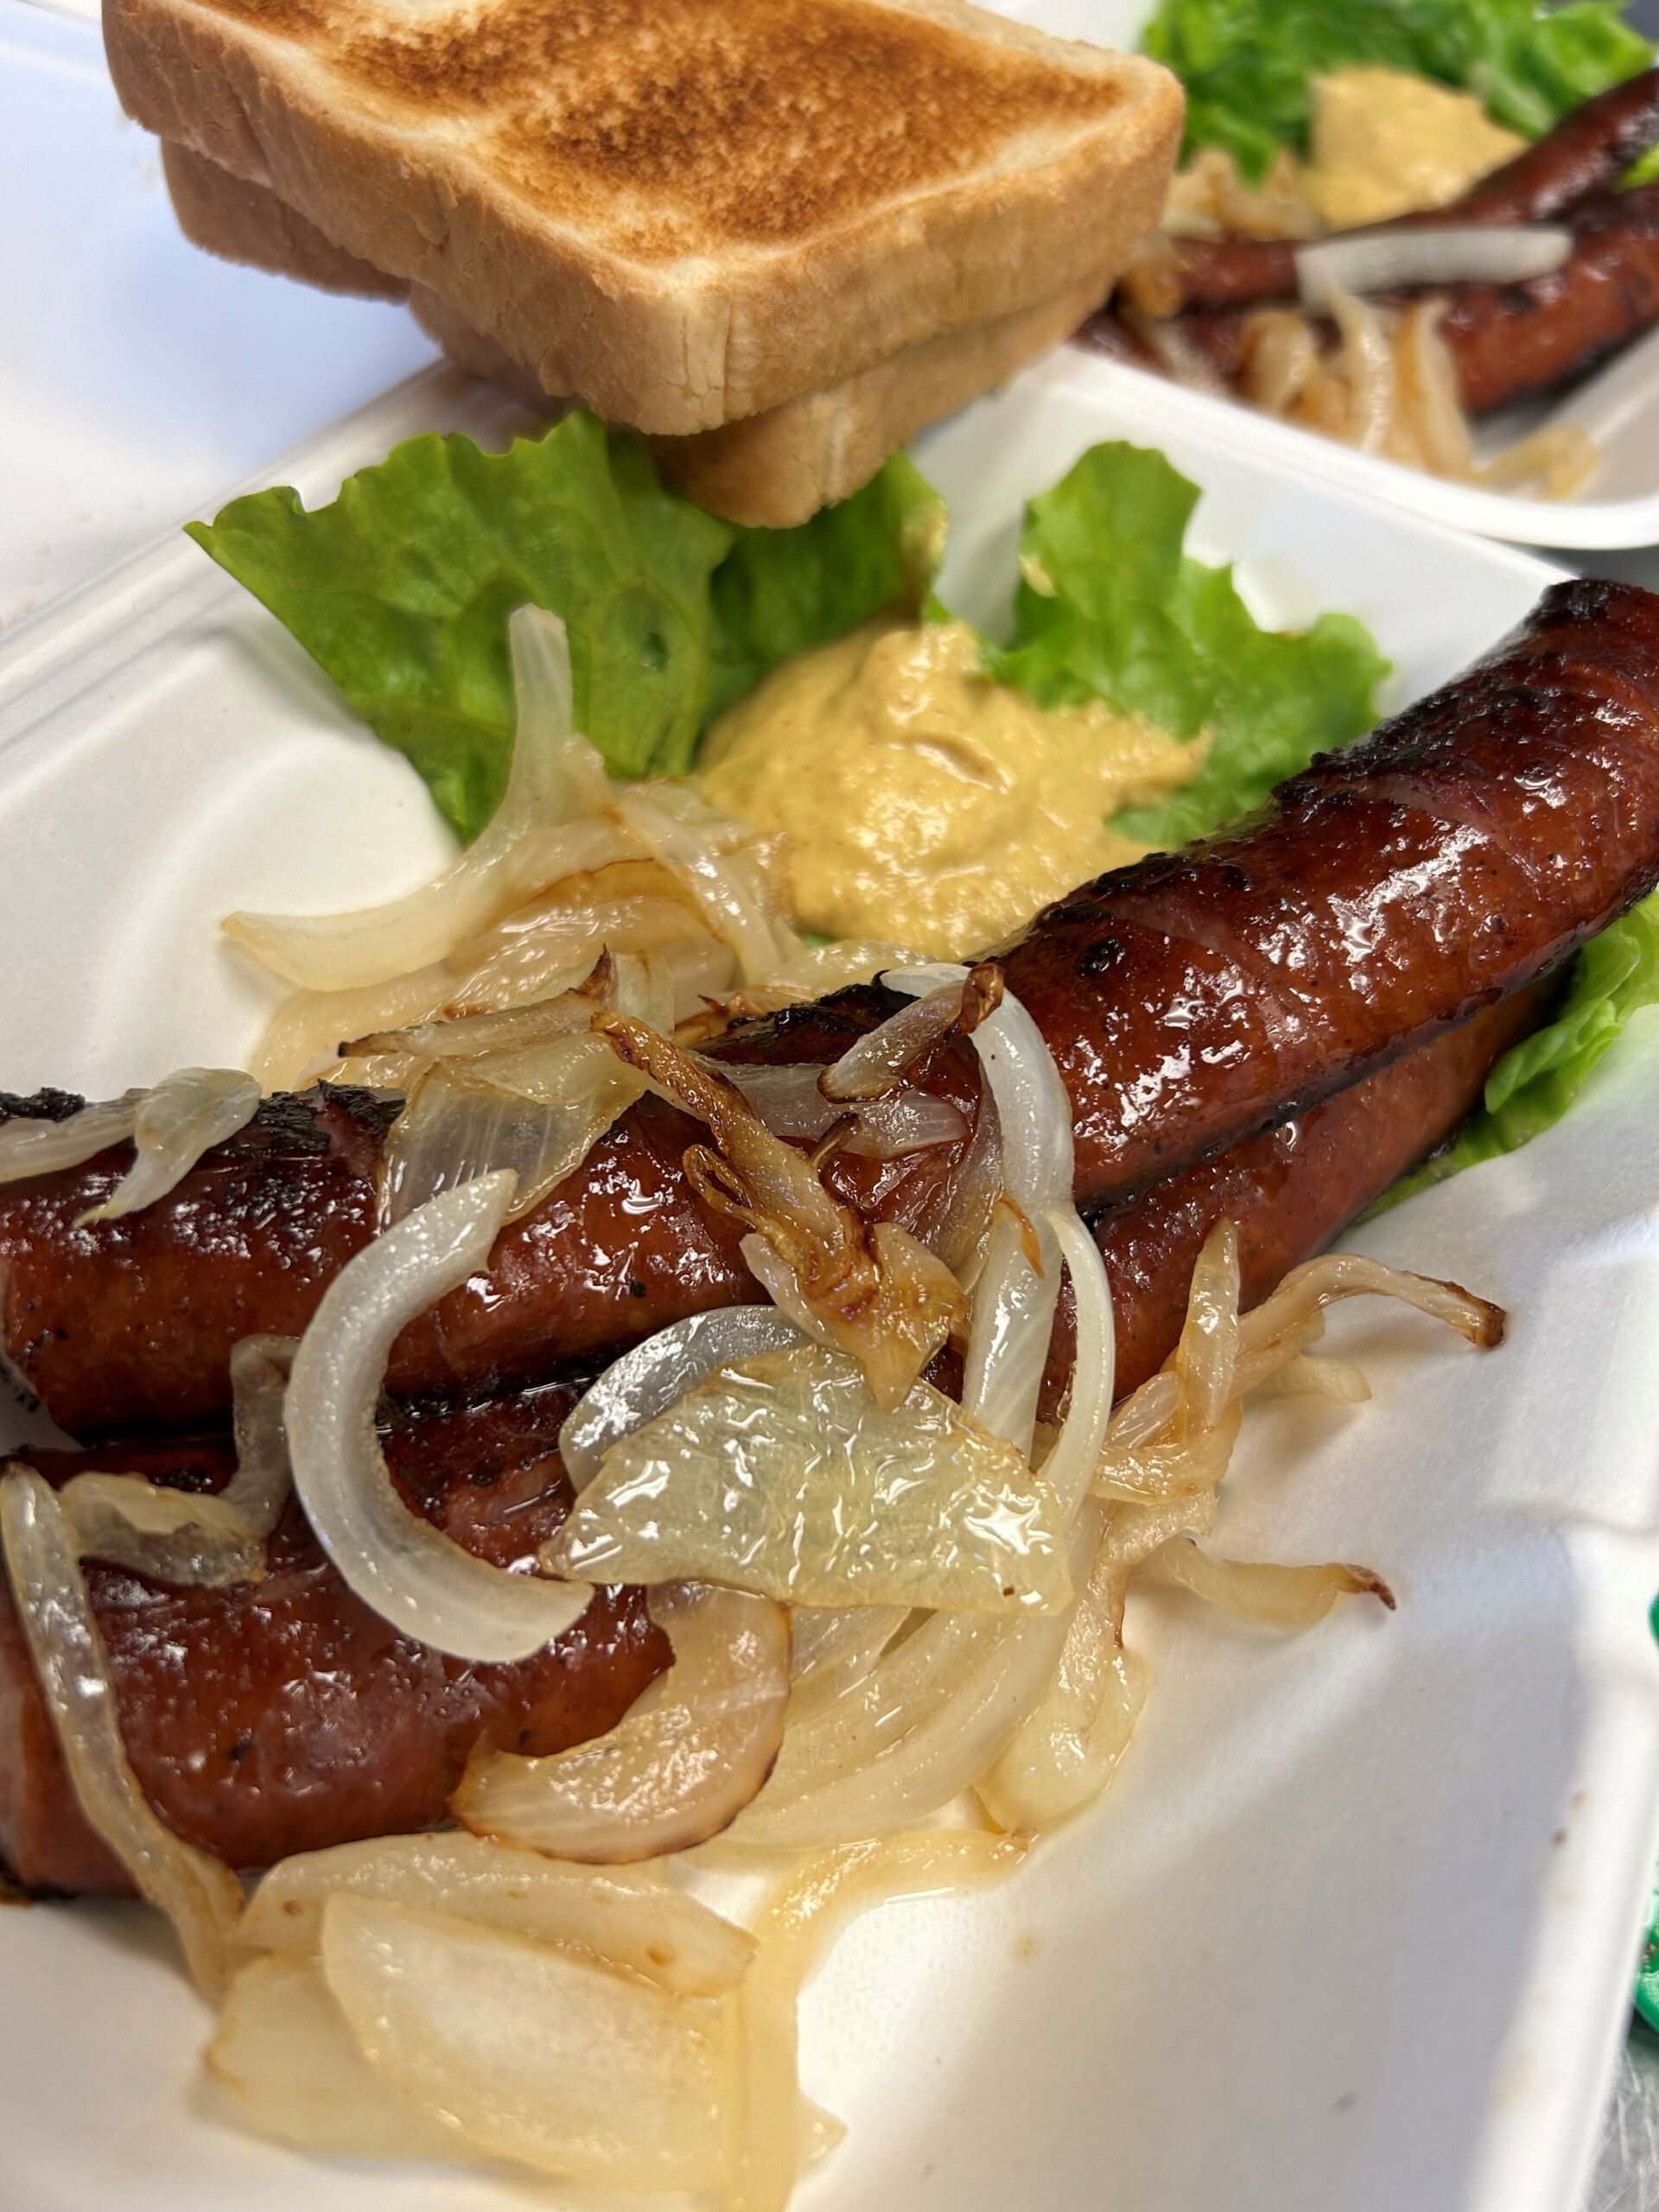 Kat's Polish Kielbasa Appetizer Takeout Order with long slivers of kielbasa, topped with fried onions, having a serving of Slavic mustard on a bed of greens, and slices of toast in a white take-out food container with another kielbasa order in the background.